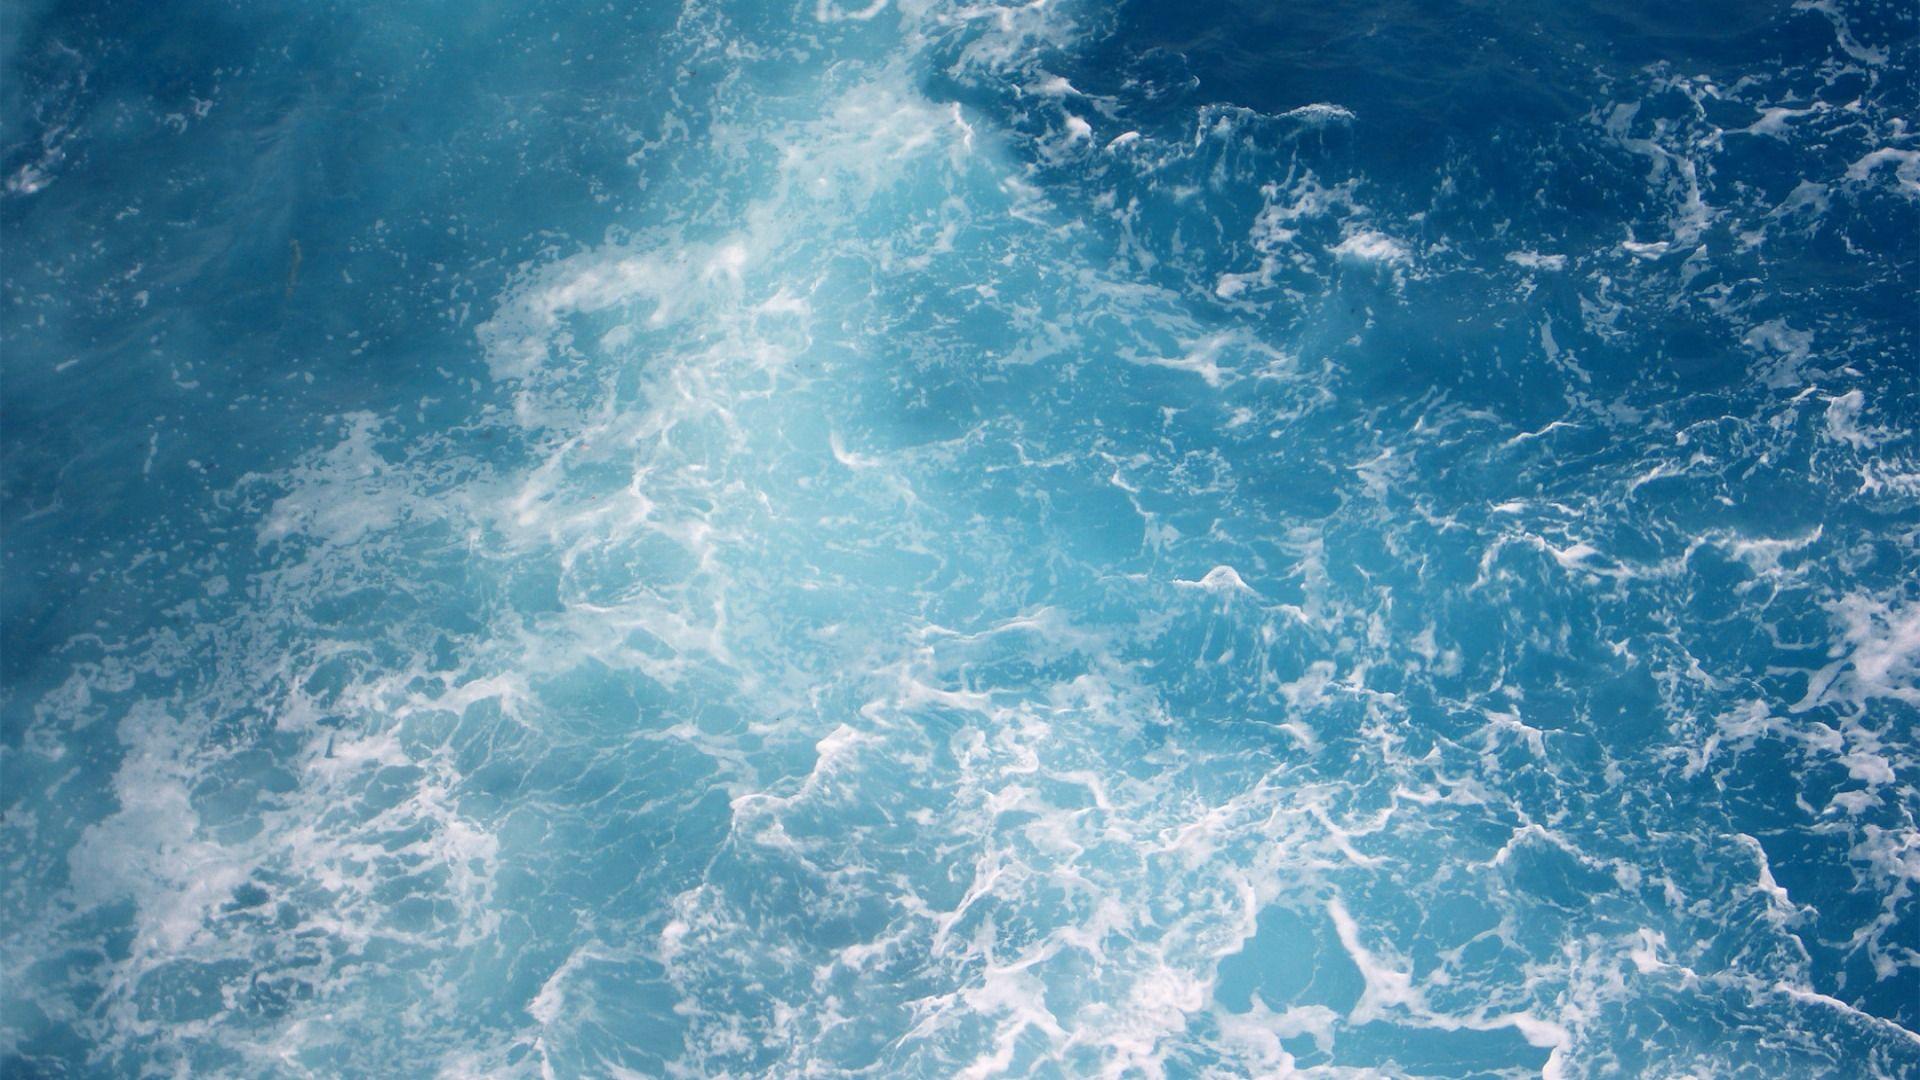 water background tumblr 11. Background Check All